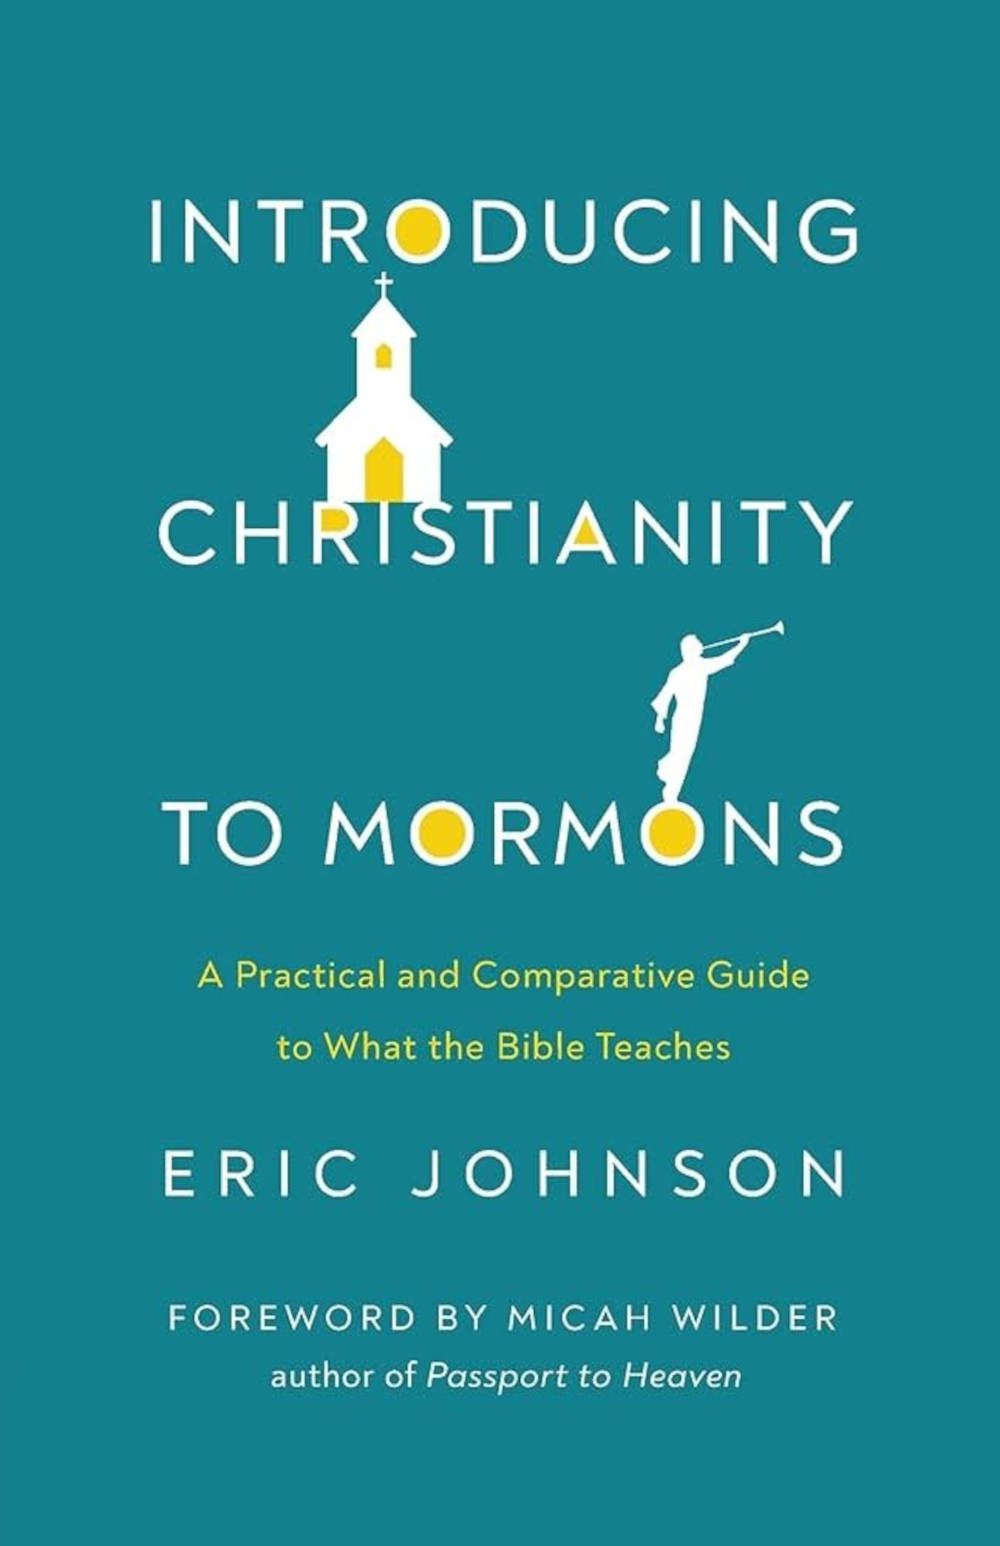 Introducing Christianity to Mormons Image